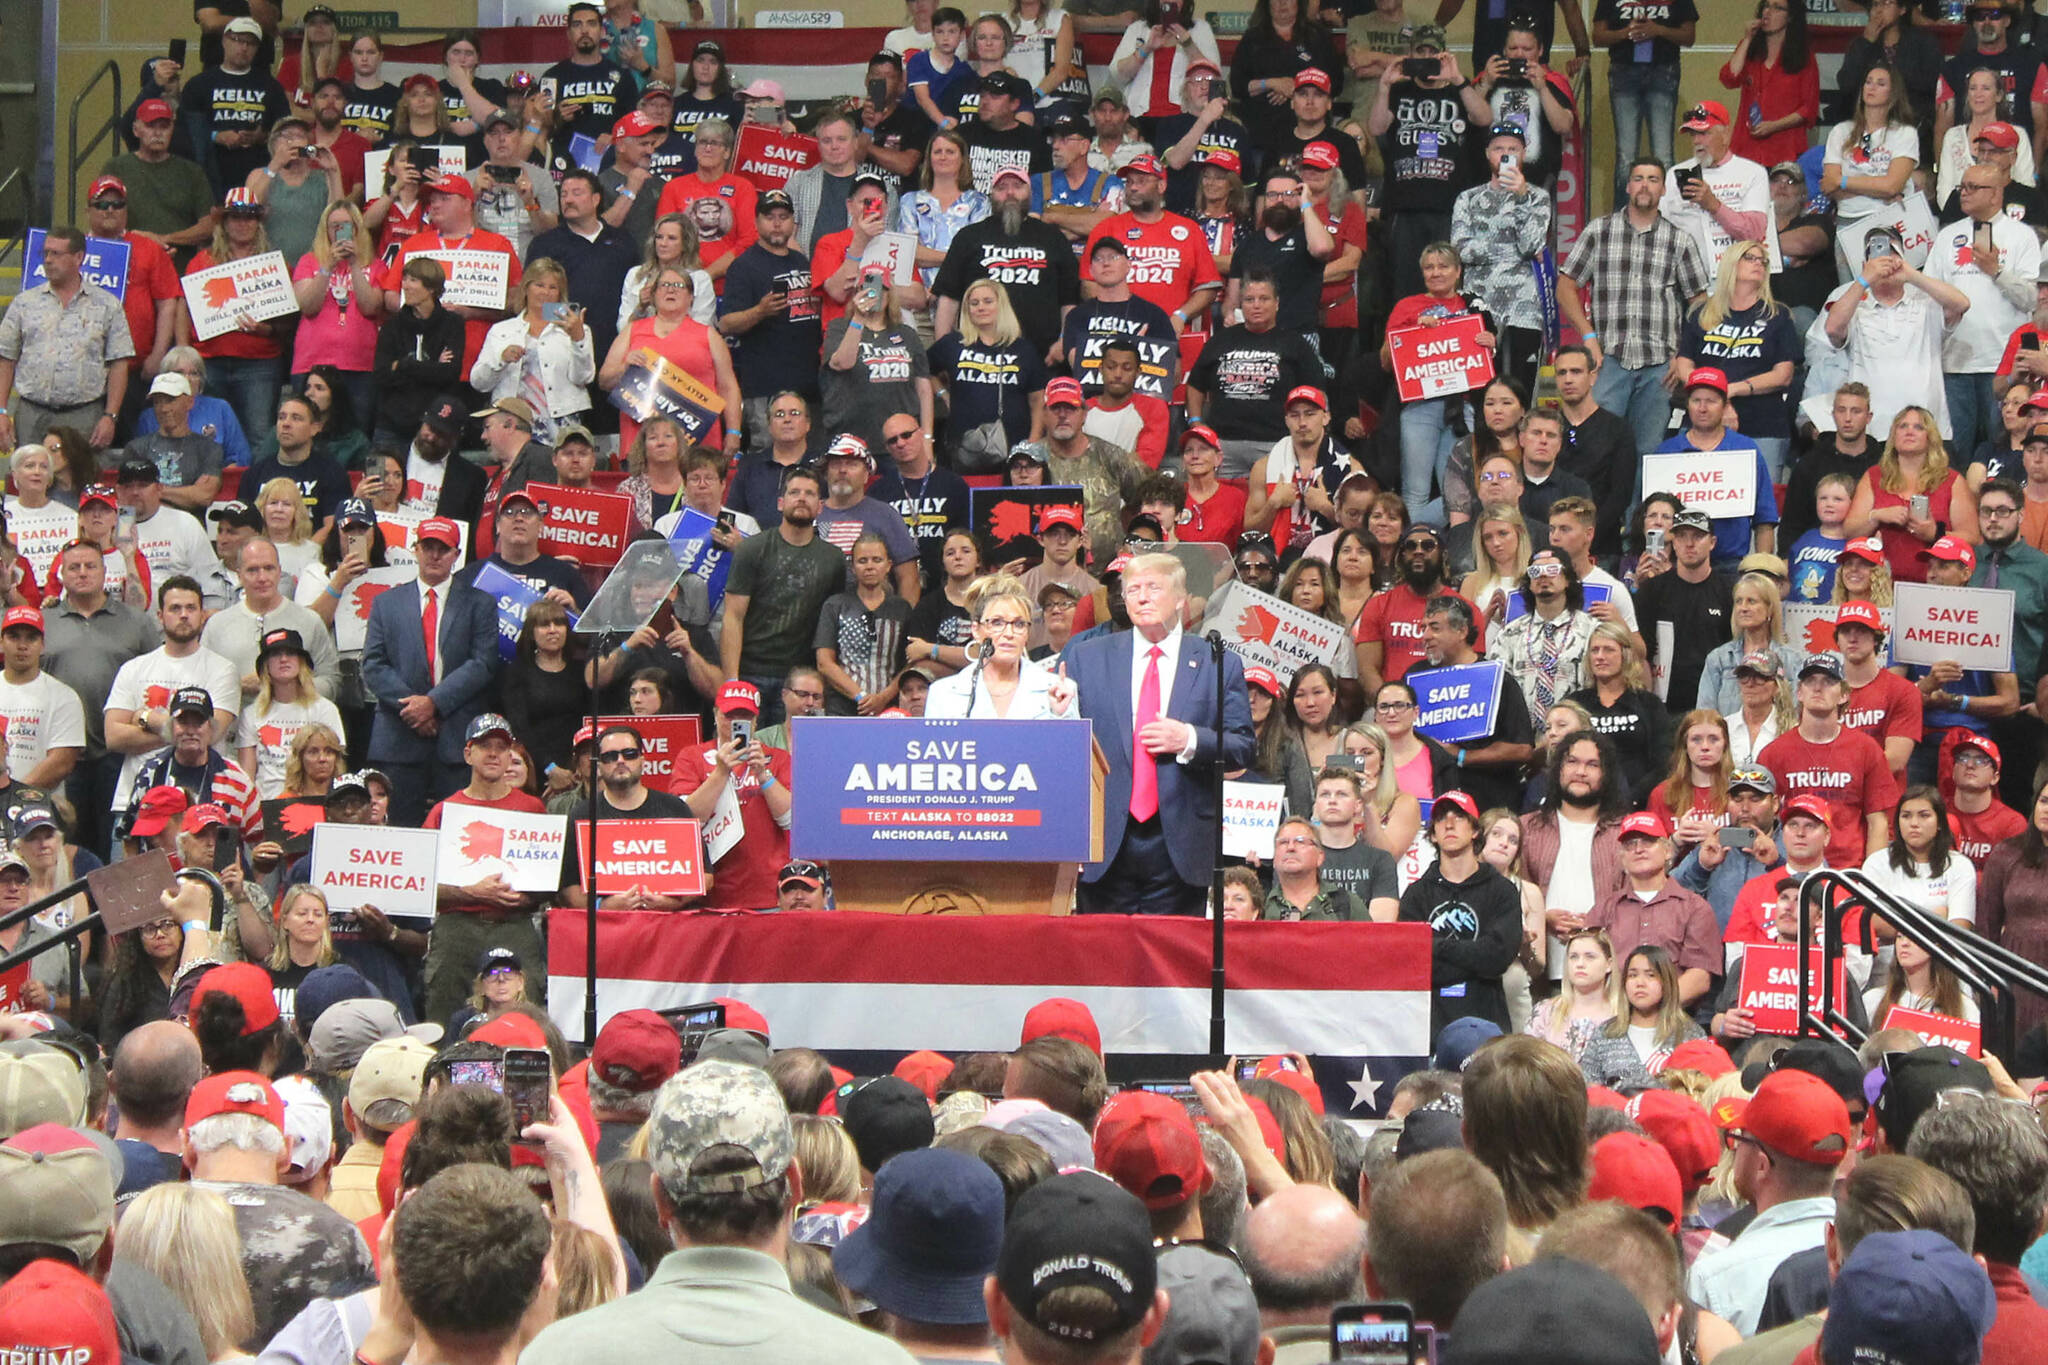 Sarah Palin (left) and Donald Trump (right) speak during a Save America rally at the Alaska Airlines Center on Saturday, July 9, 2022, in Anchorage, Alaska. (Ashlyn O’Hara/Peninsula Clarion)